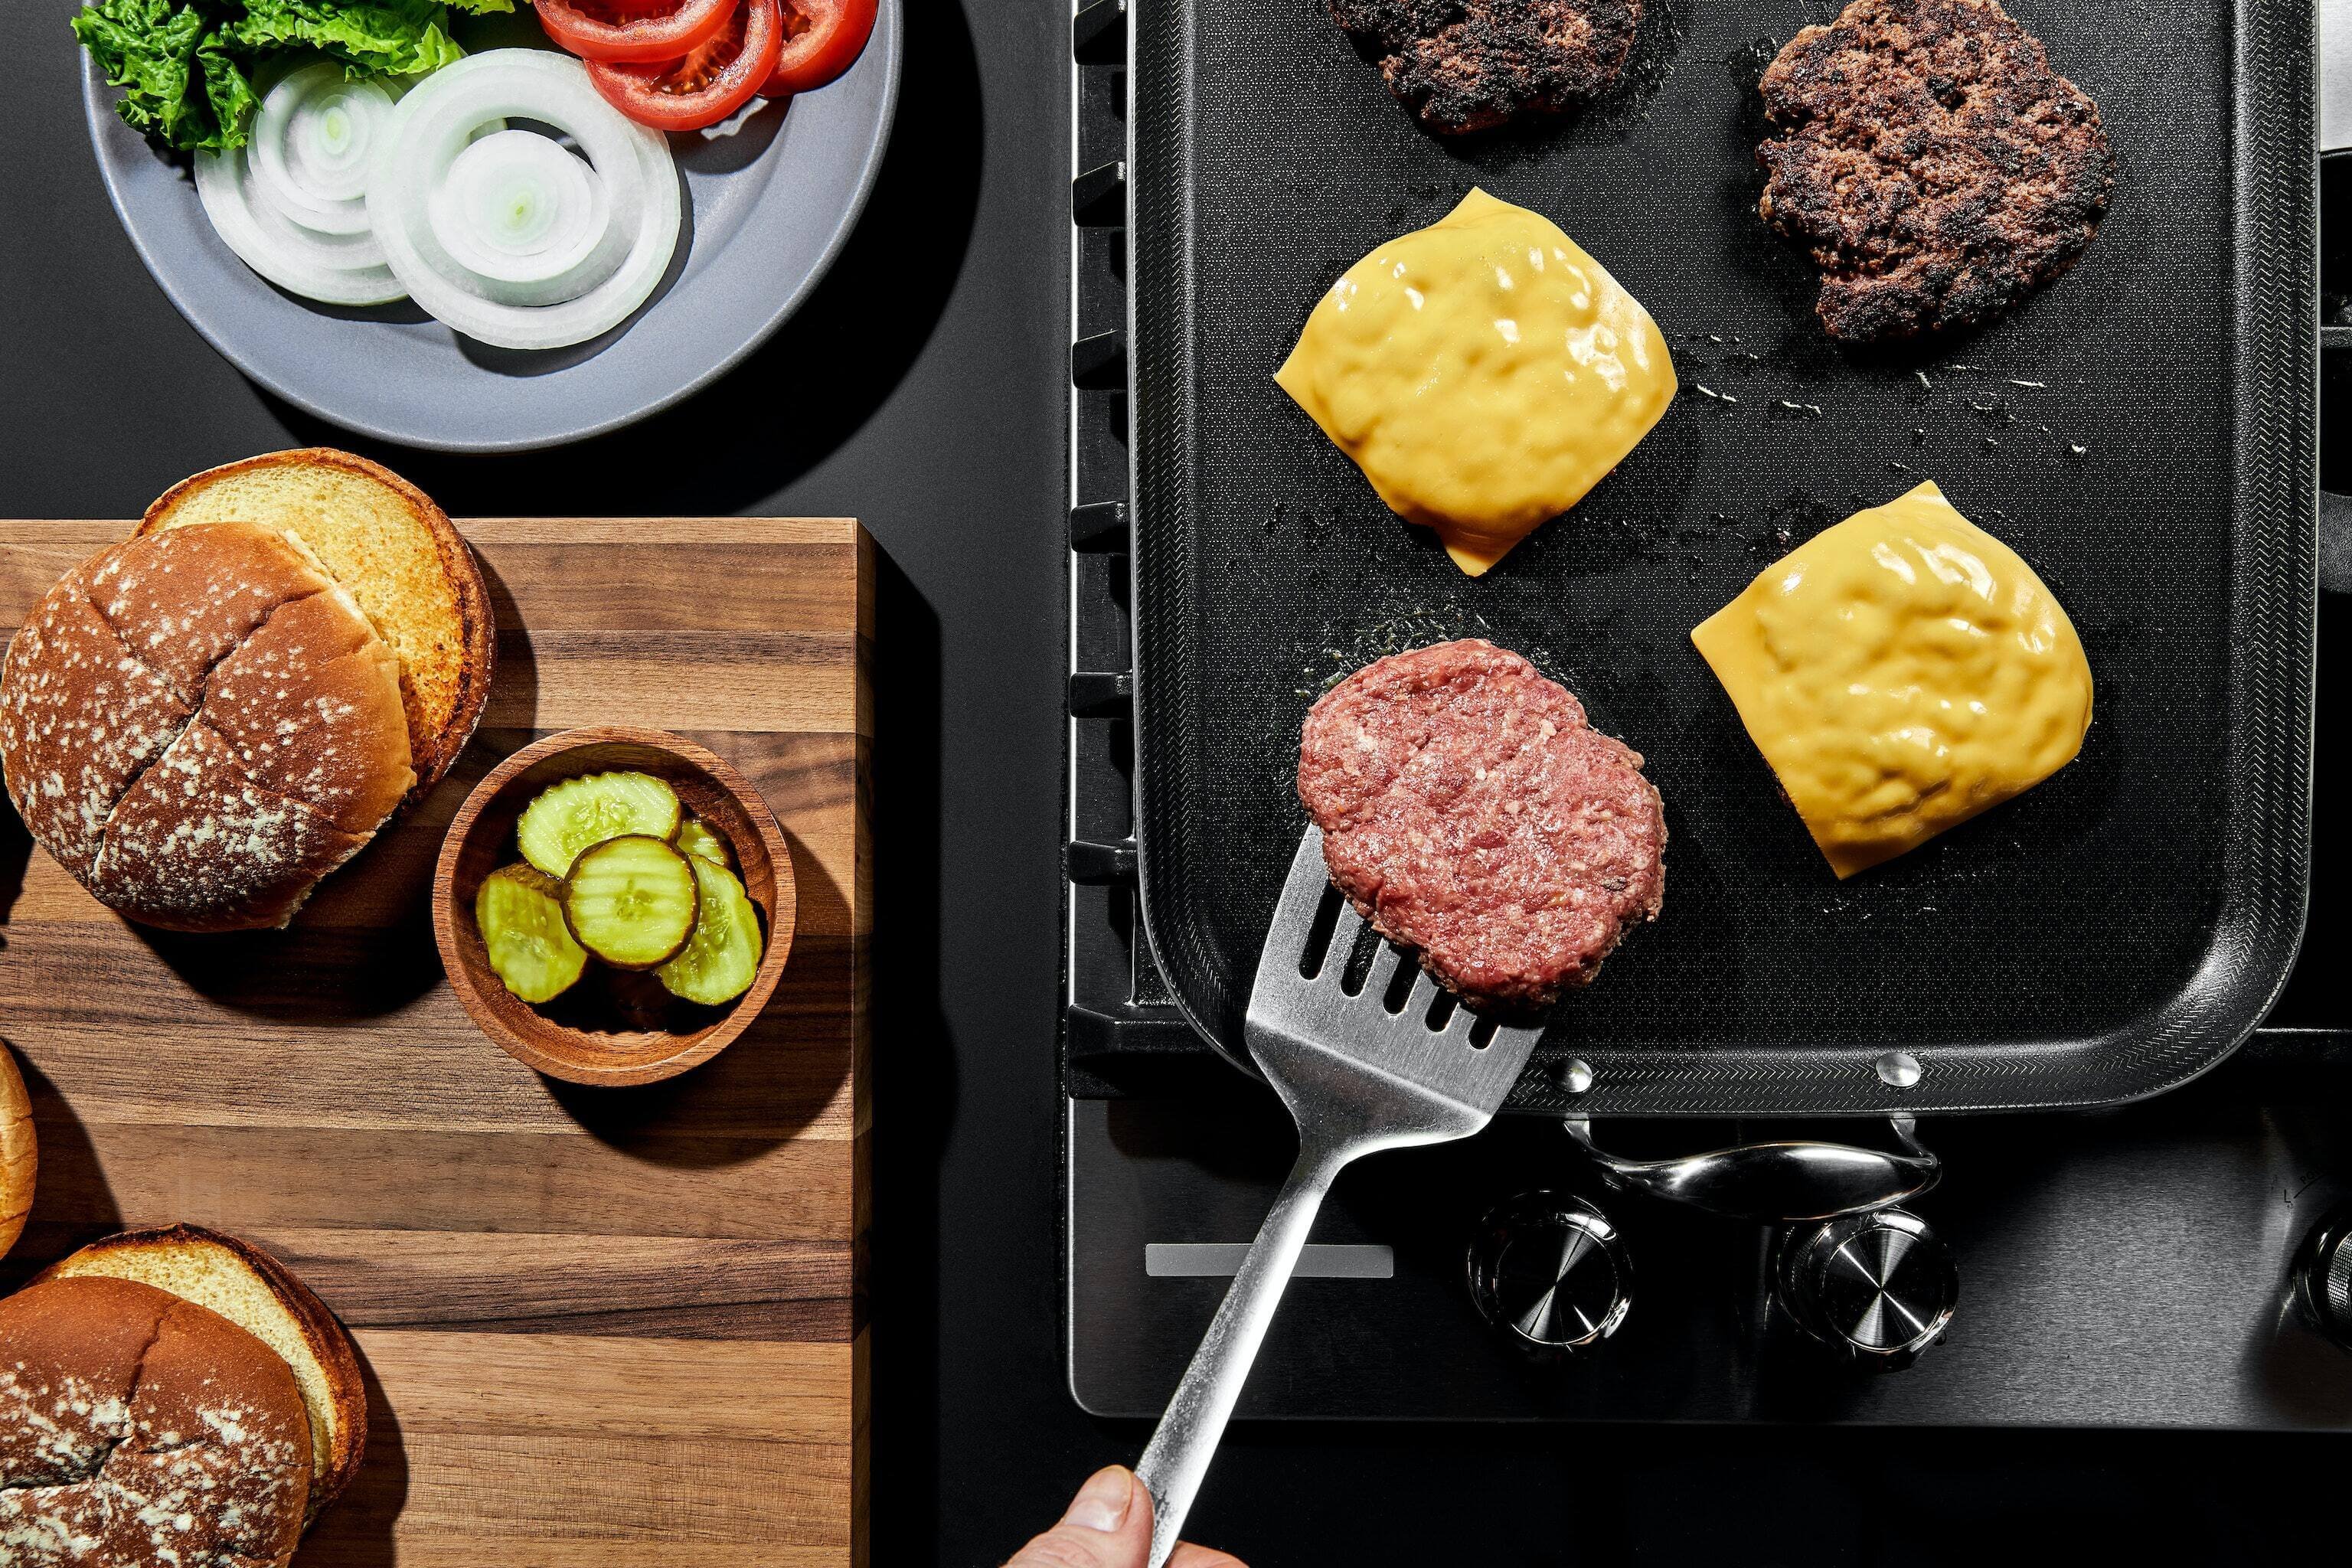 Craft the perfect burger with our Hybrid Double-Burner Griddle. Experience even cooking with its tri-ply construction, accompanied by fresh ingredients for a gourmet meal at home.